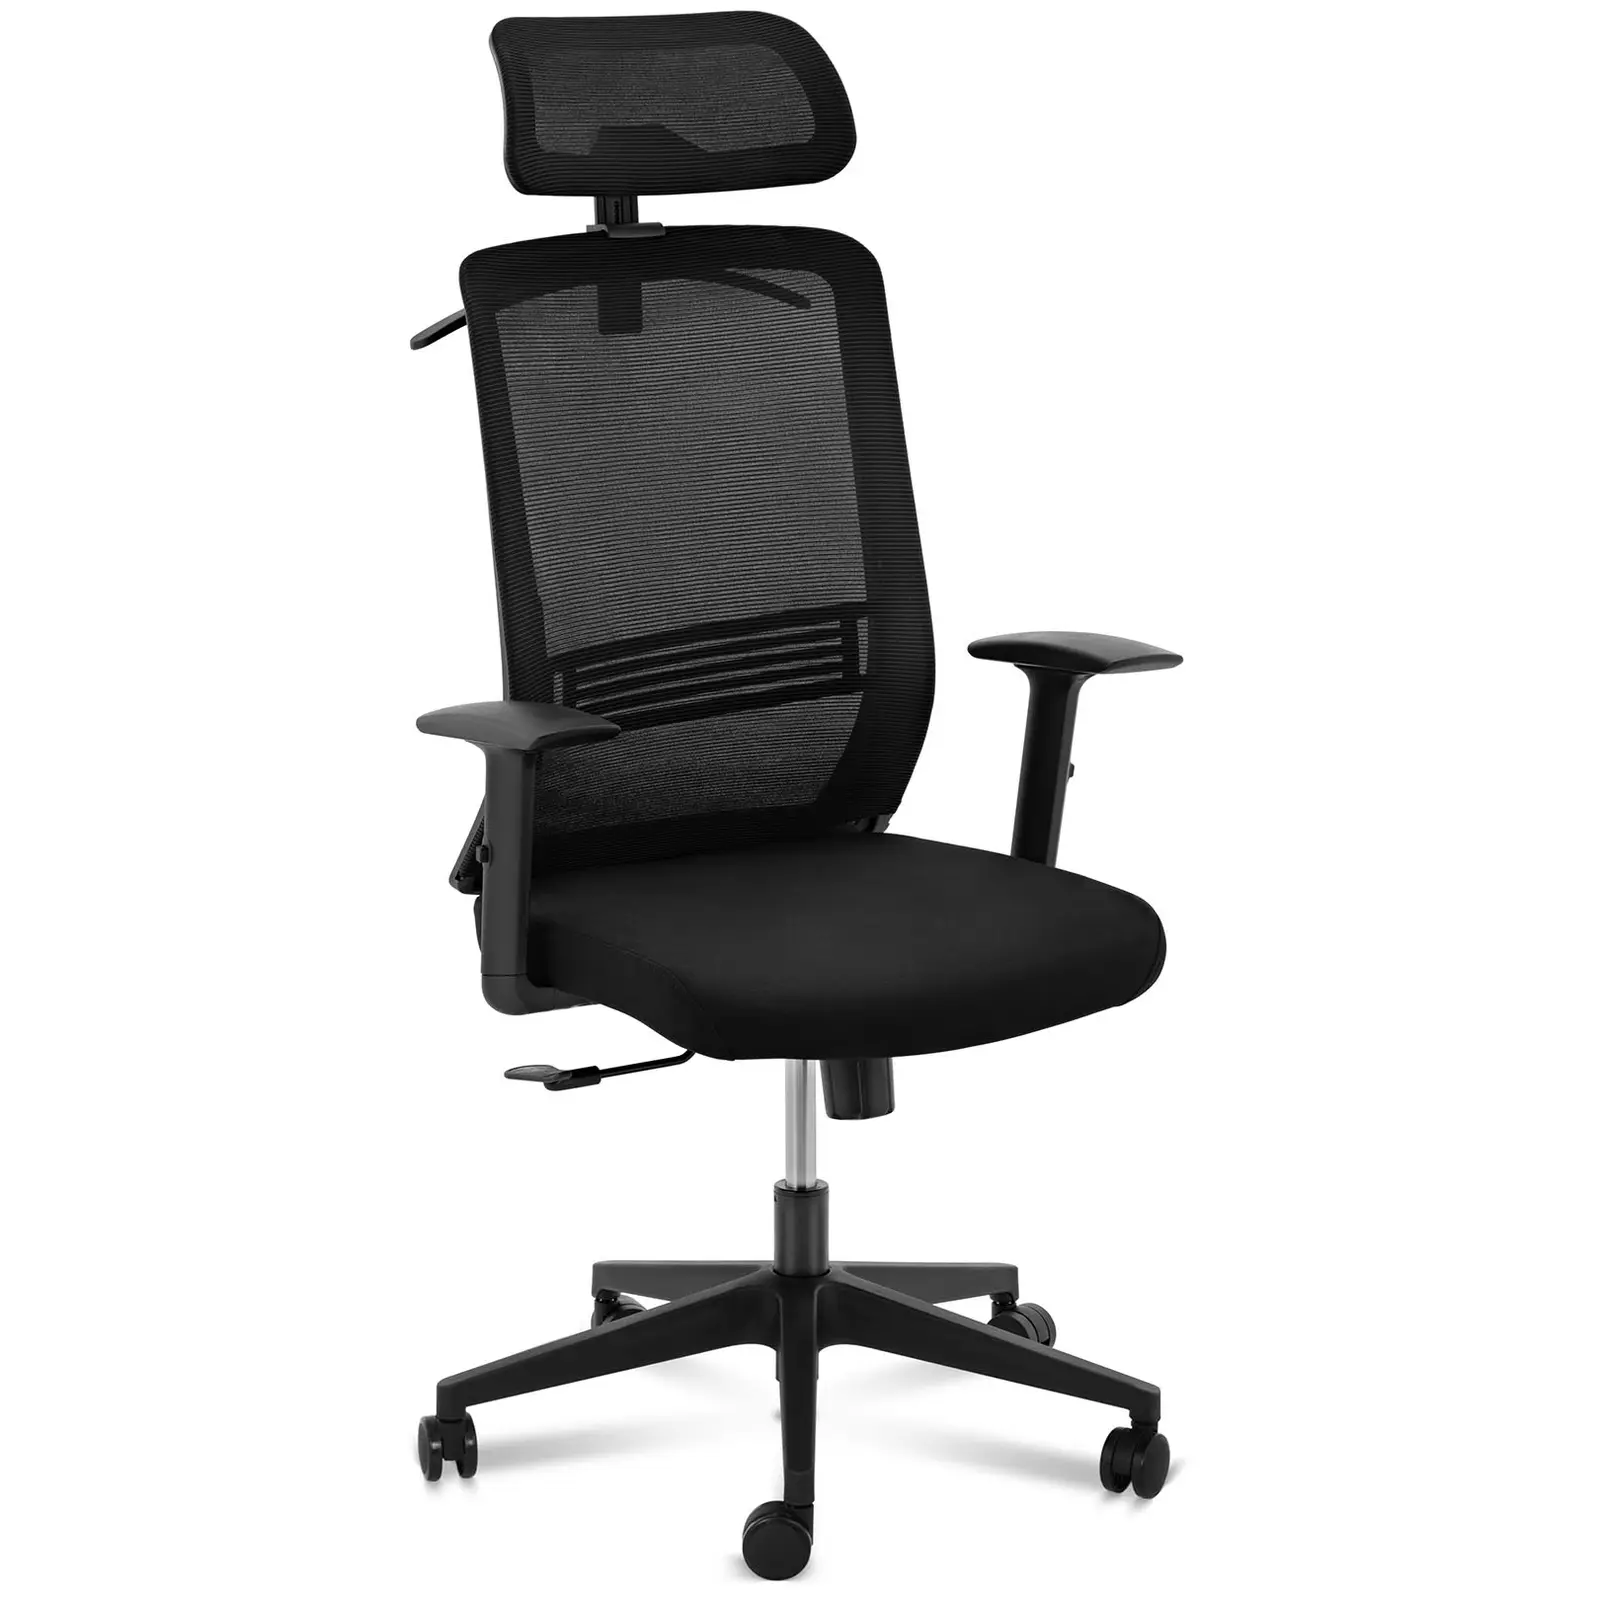 Office Chair - mesh back - headrest - 50 x 61 cm seat - up to 150 kg - black / blue / grey